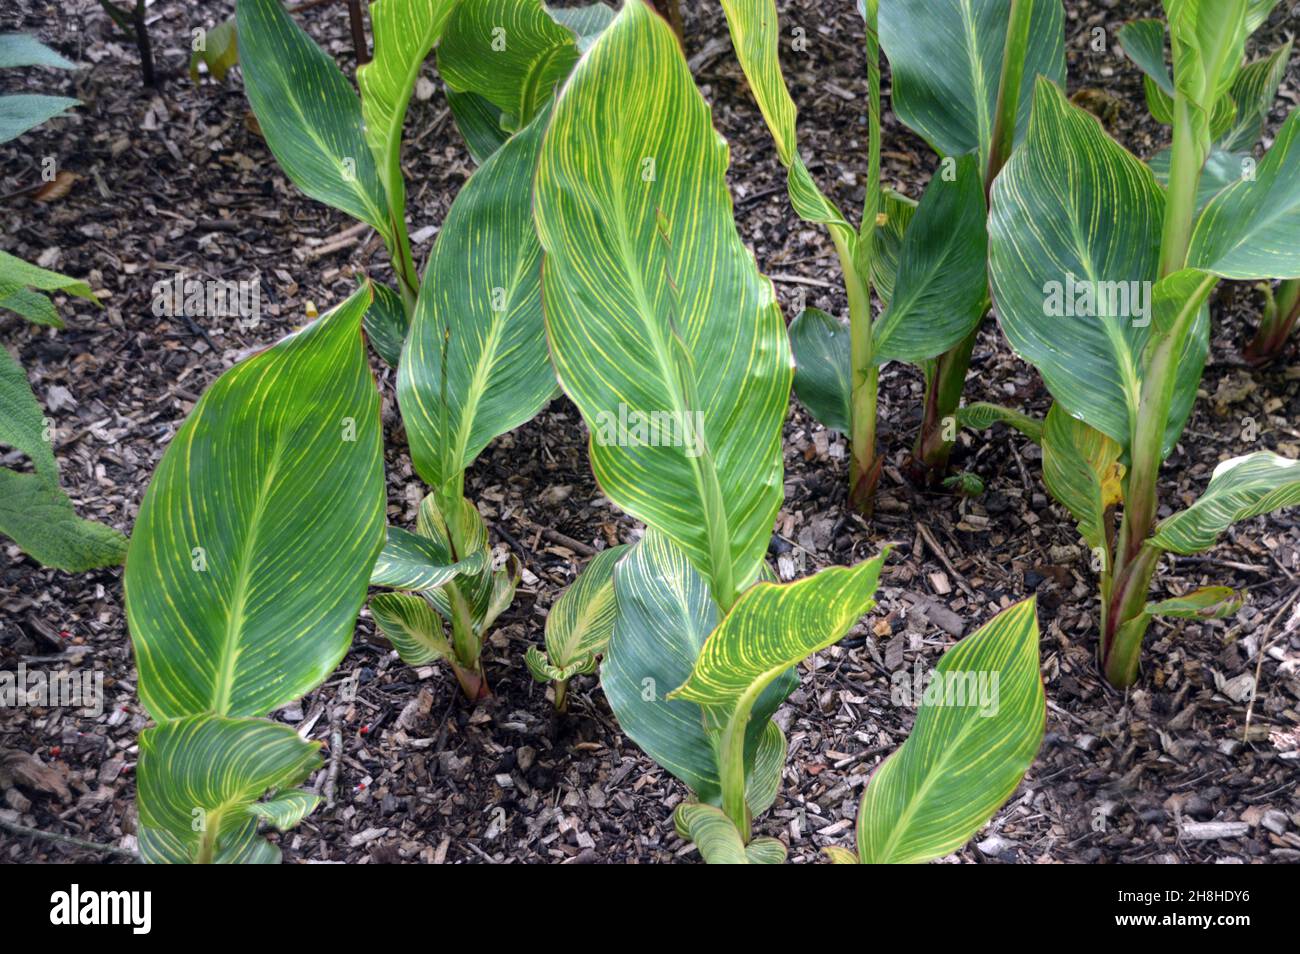 Clump of Green/Yellow Variegated Canna 'Pretoria' (Canna Lily) Leaves grown in the Borders at Newby Hall & Gardens, Ripon, North Yorkshire, UK. Stock Photo